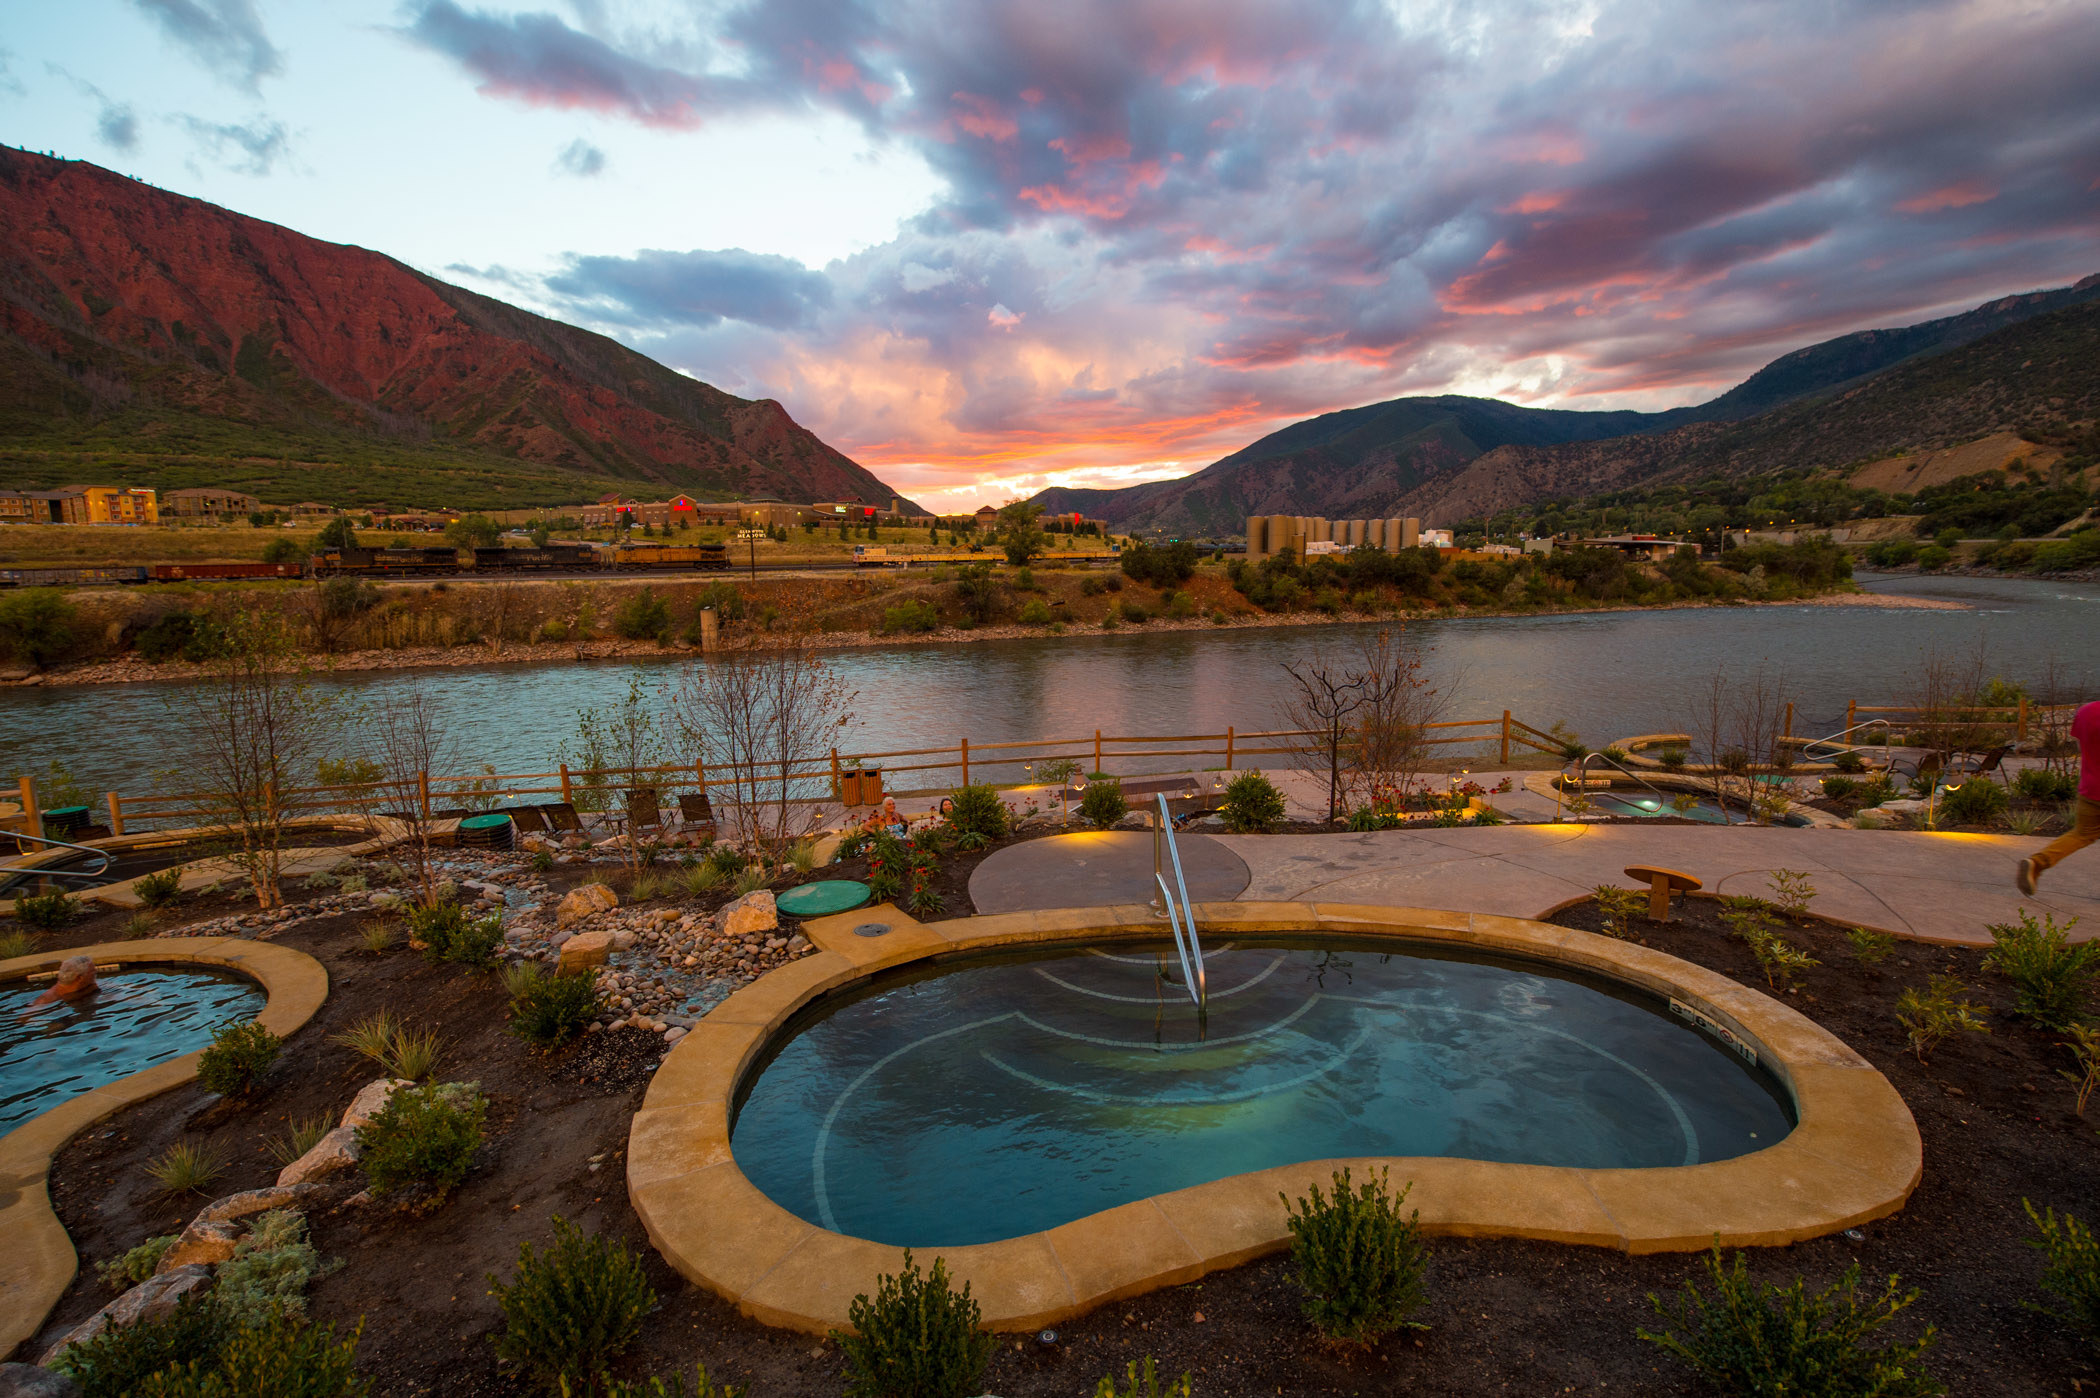 15 Best Hot Springs In The US To Add To Your Bucket List picture